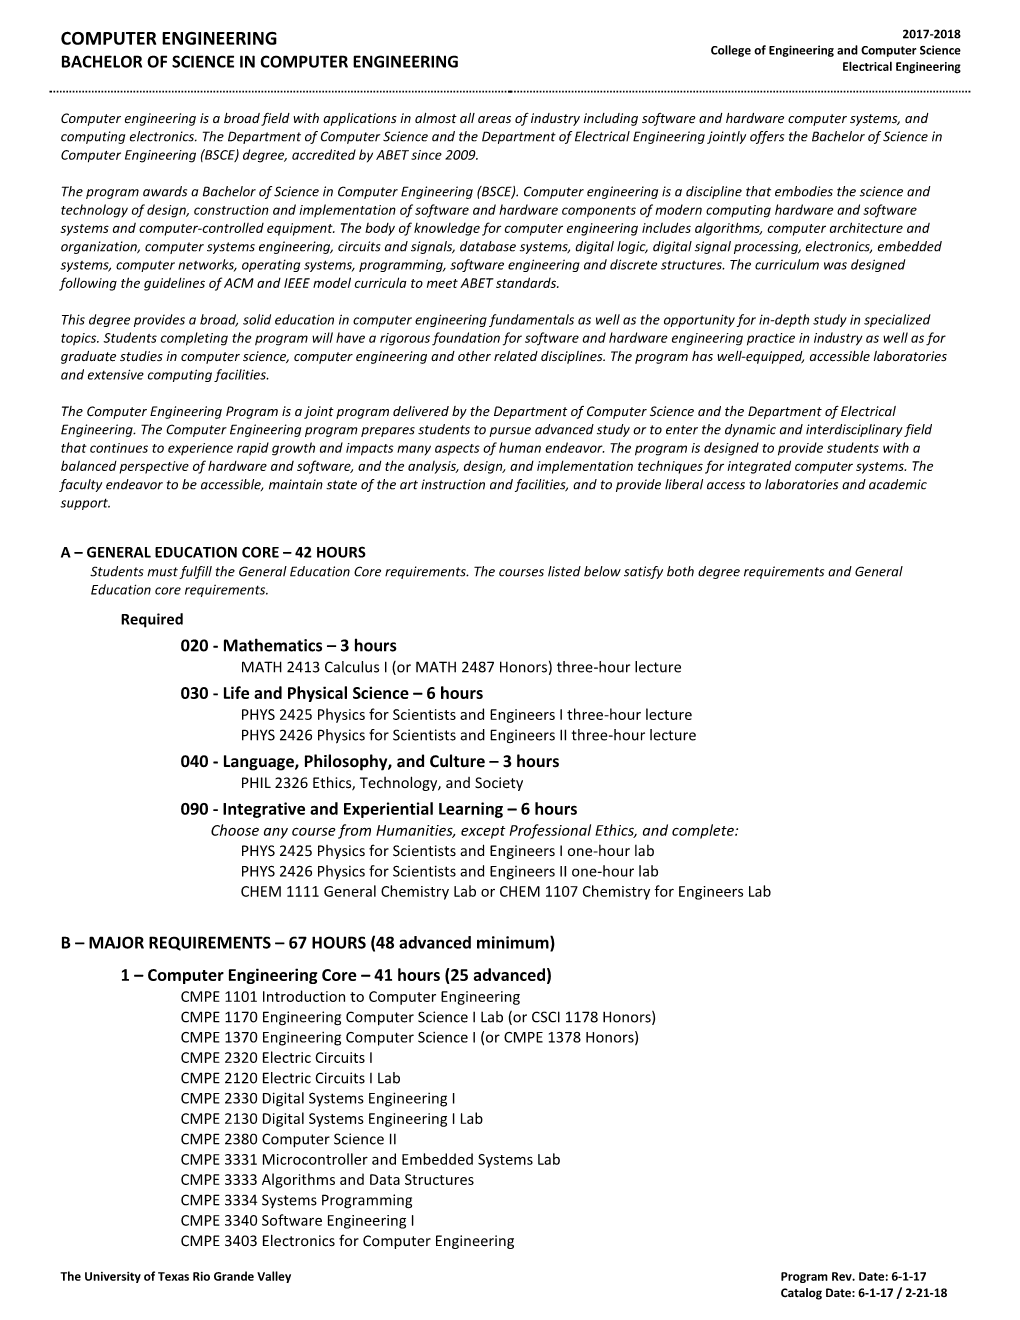 Bachelors of Science in Computer Engineering Degree Plan